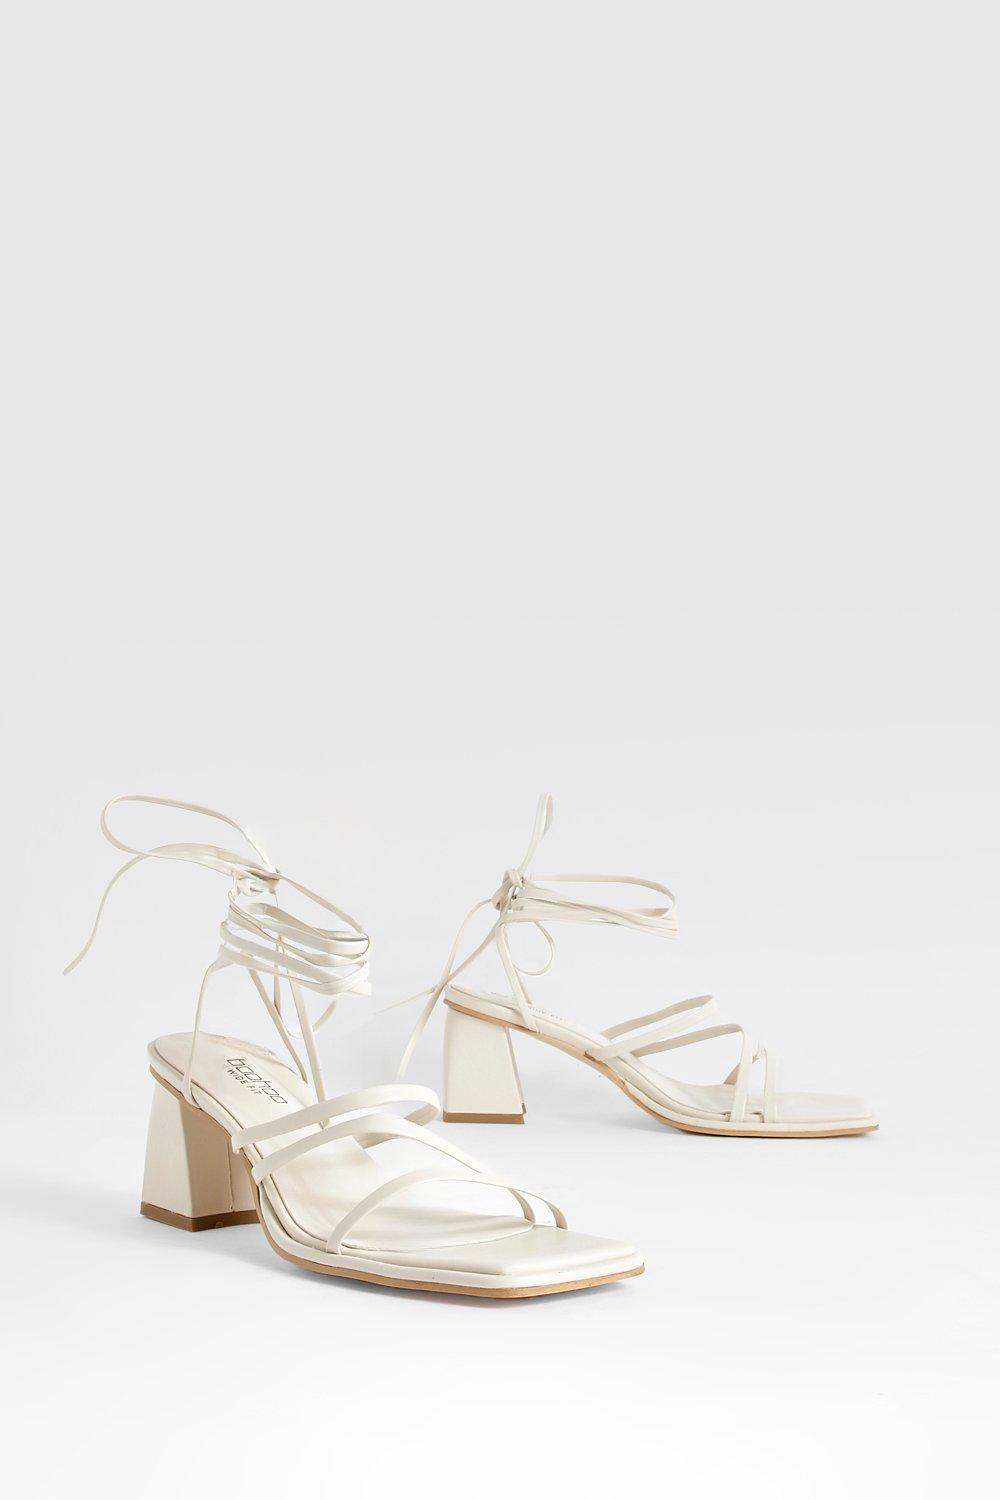 Cream wide fit chain heeled court shoes | Court shoes, Heels, Shoes